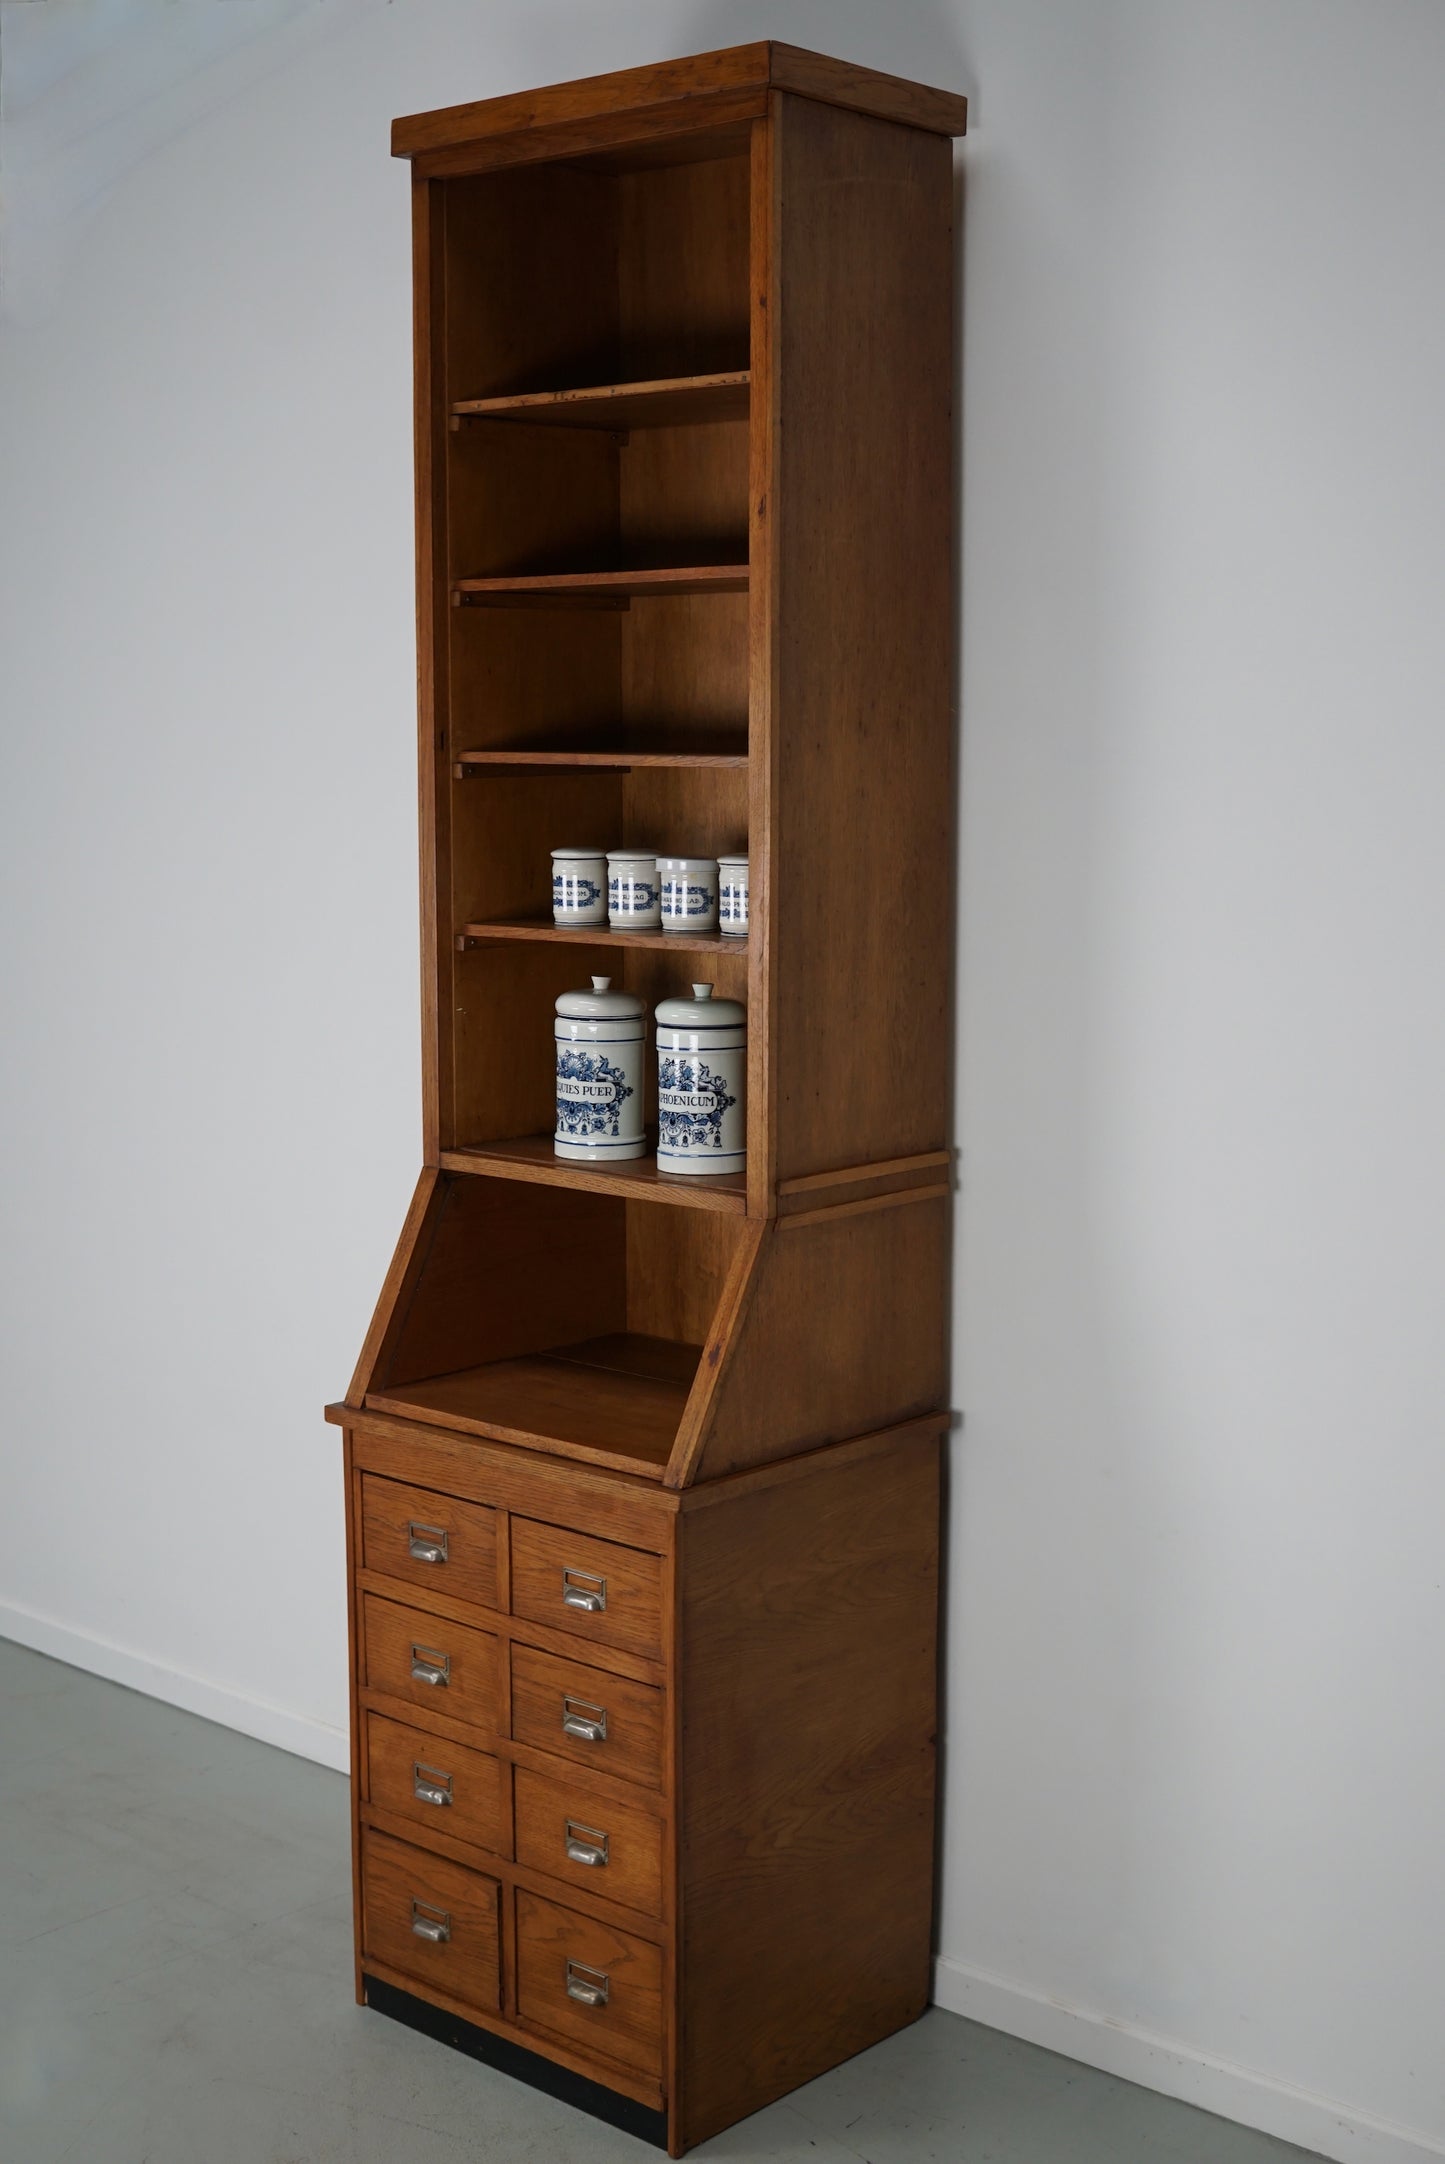 Dutch Oak Grocery Store / Apothecary Shop Cabinet, 1920/30s